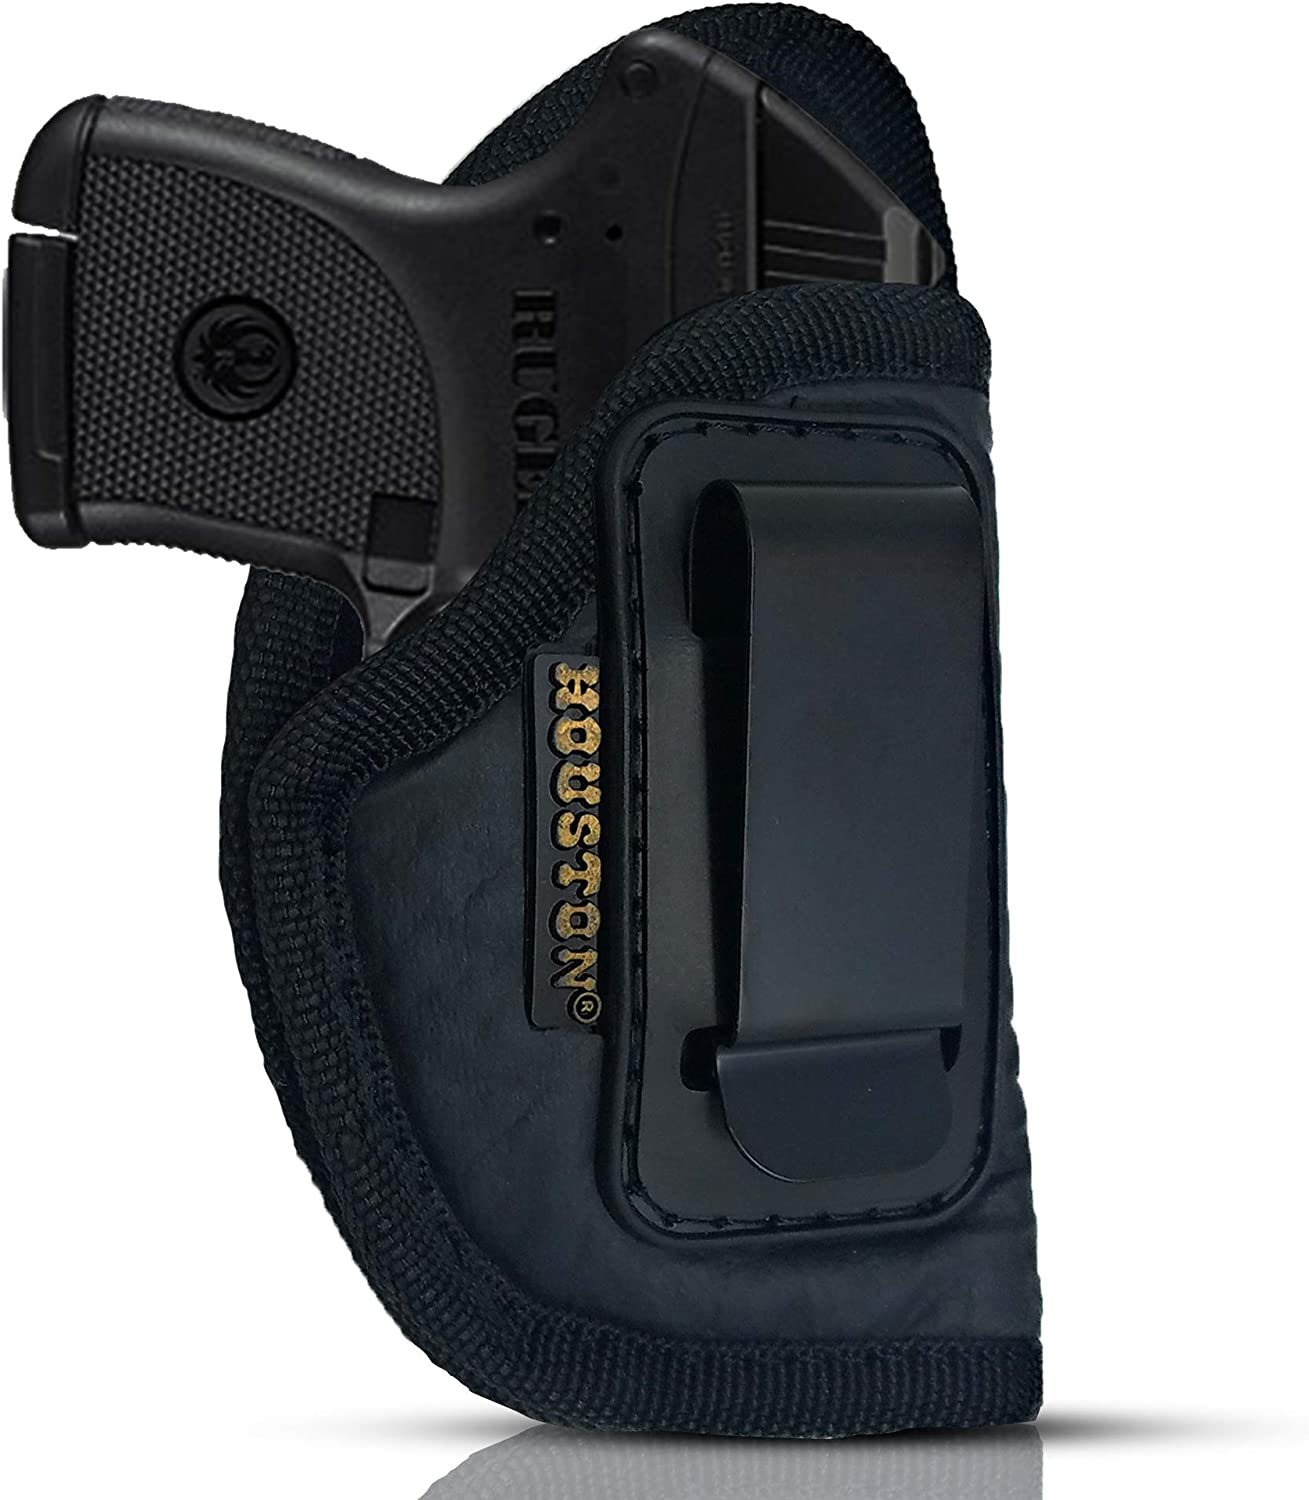 IWB Gun Holster by Houston - ECO Leather Concealed Carry Soft Material | Suede Interior for Maximum Protection | Fits: S&W Bodyguard, Ruger, Taurus TCP, Sig P238, Jimenez JA, PPK .380